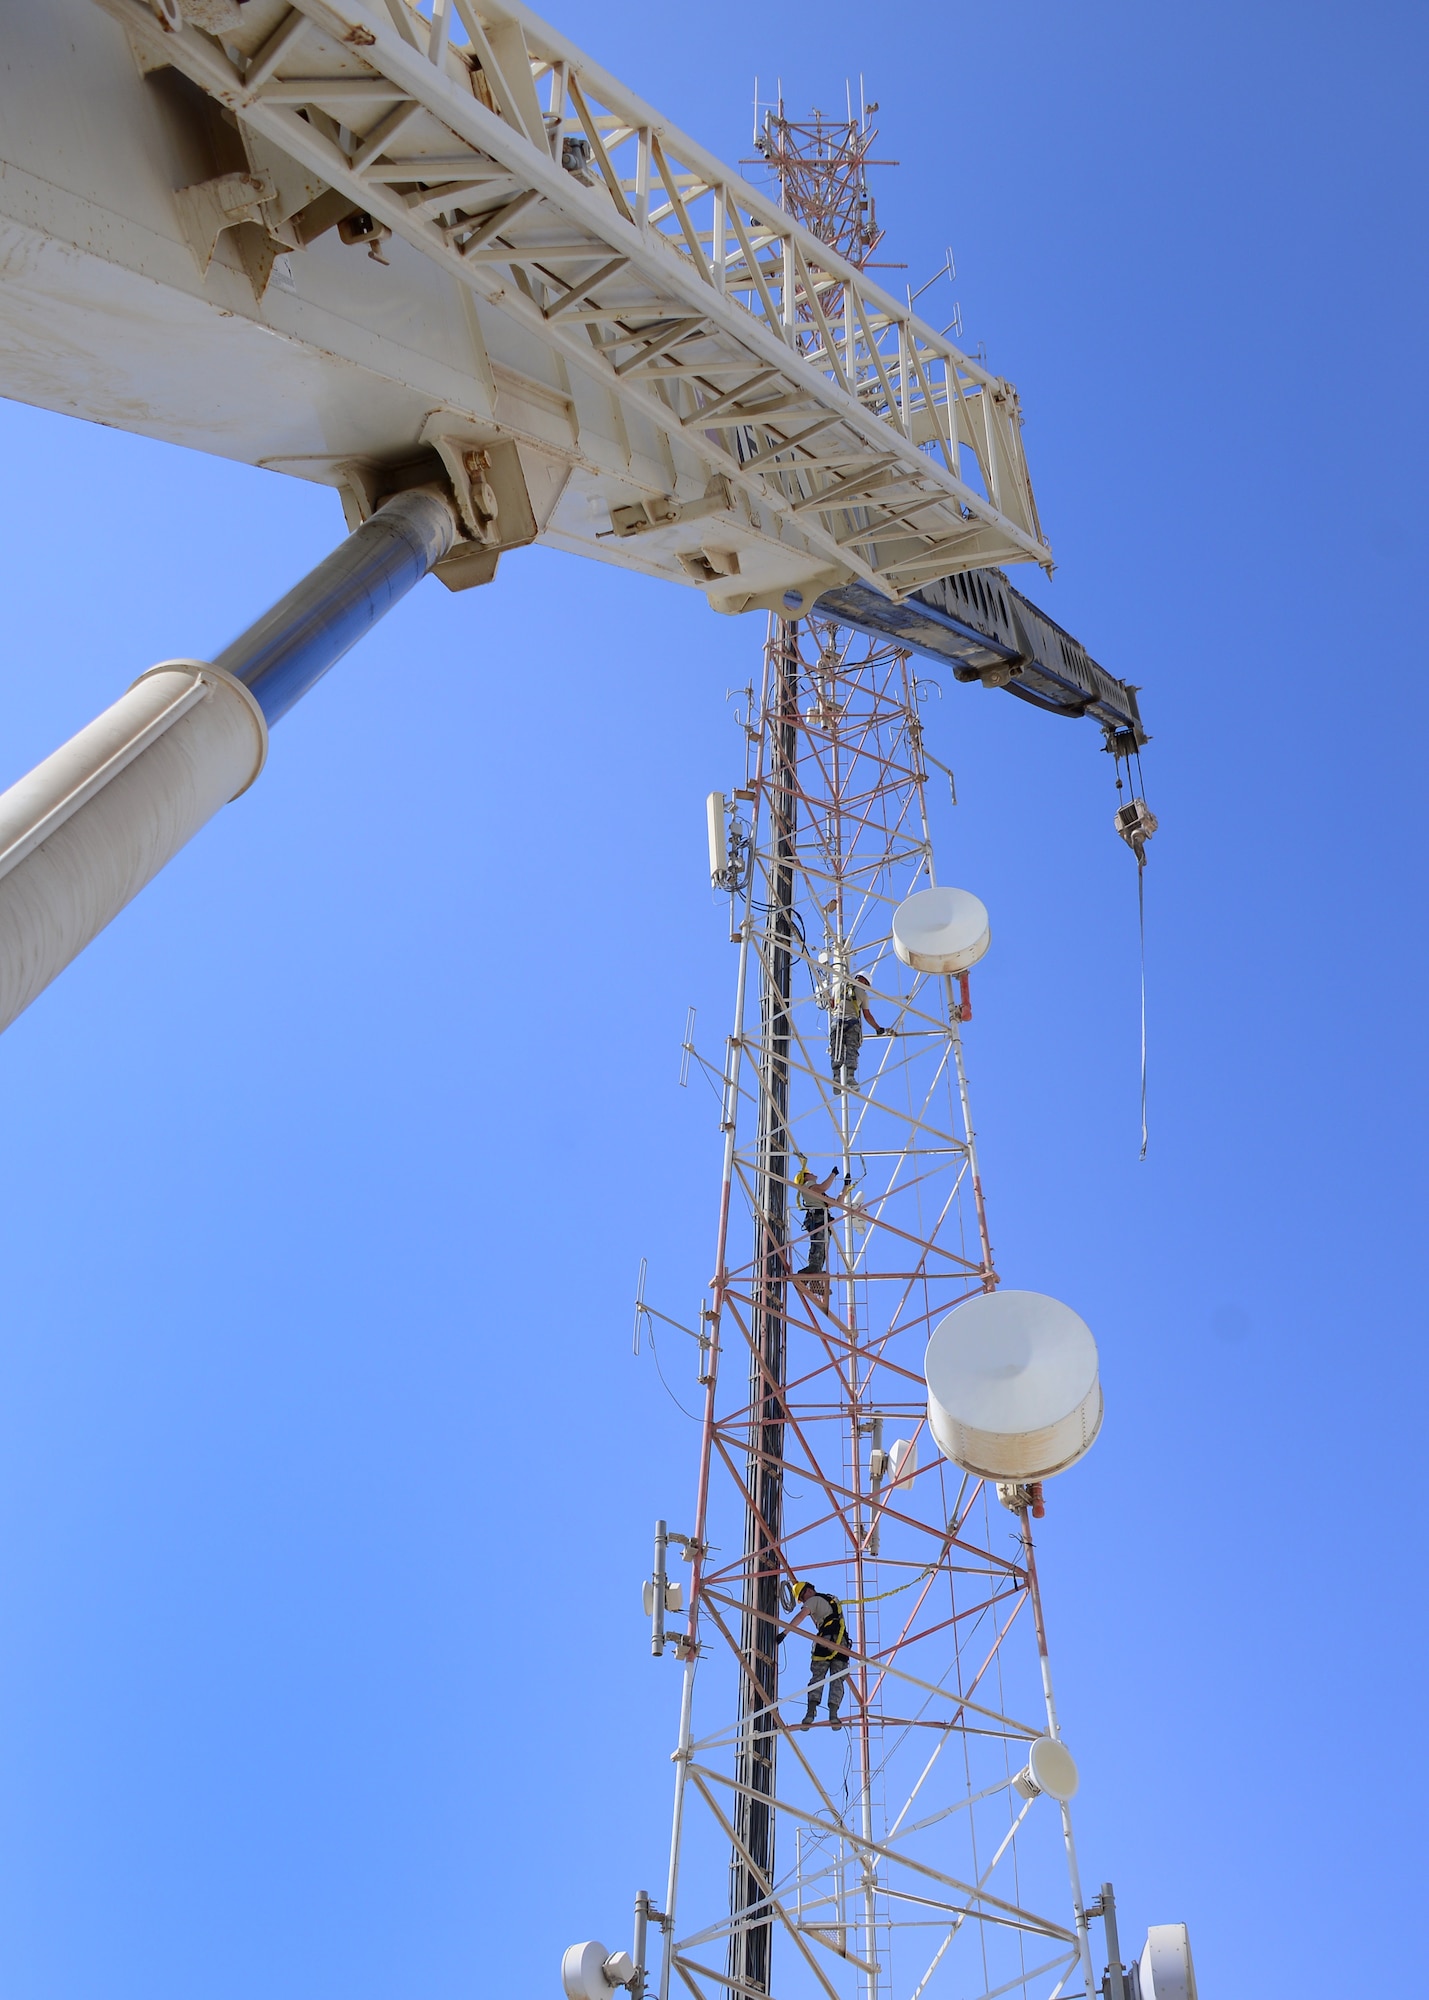 Airmen from the 379th Expeditionary Communications Squadron and 379th Expeditionary Civil Engineer Squadron climb up a radio tower Oct. 8, 2016, at Al Udeid Air Base, Qatar. The Airmen were working to remove several inactive microwave dish transmitters from the tower due to structural integrity concerns. The transmitters weighed up to 200 pounds each and required the use of a Terex RT 780 crane in order to safely bring them down to the ground once detached. (U.S. Air Force photo/Senior Airman Miles Wilson/Released)